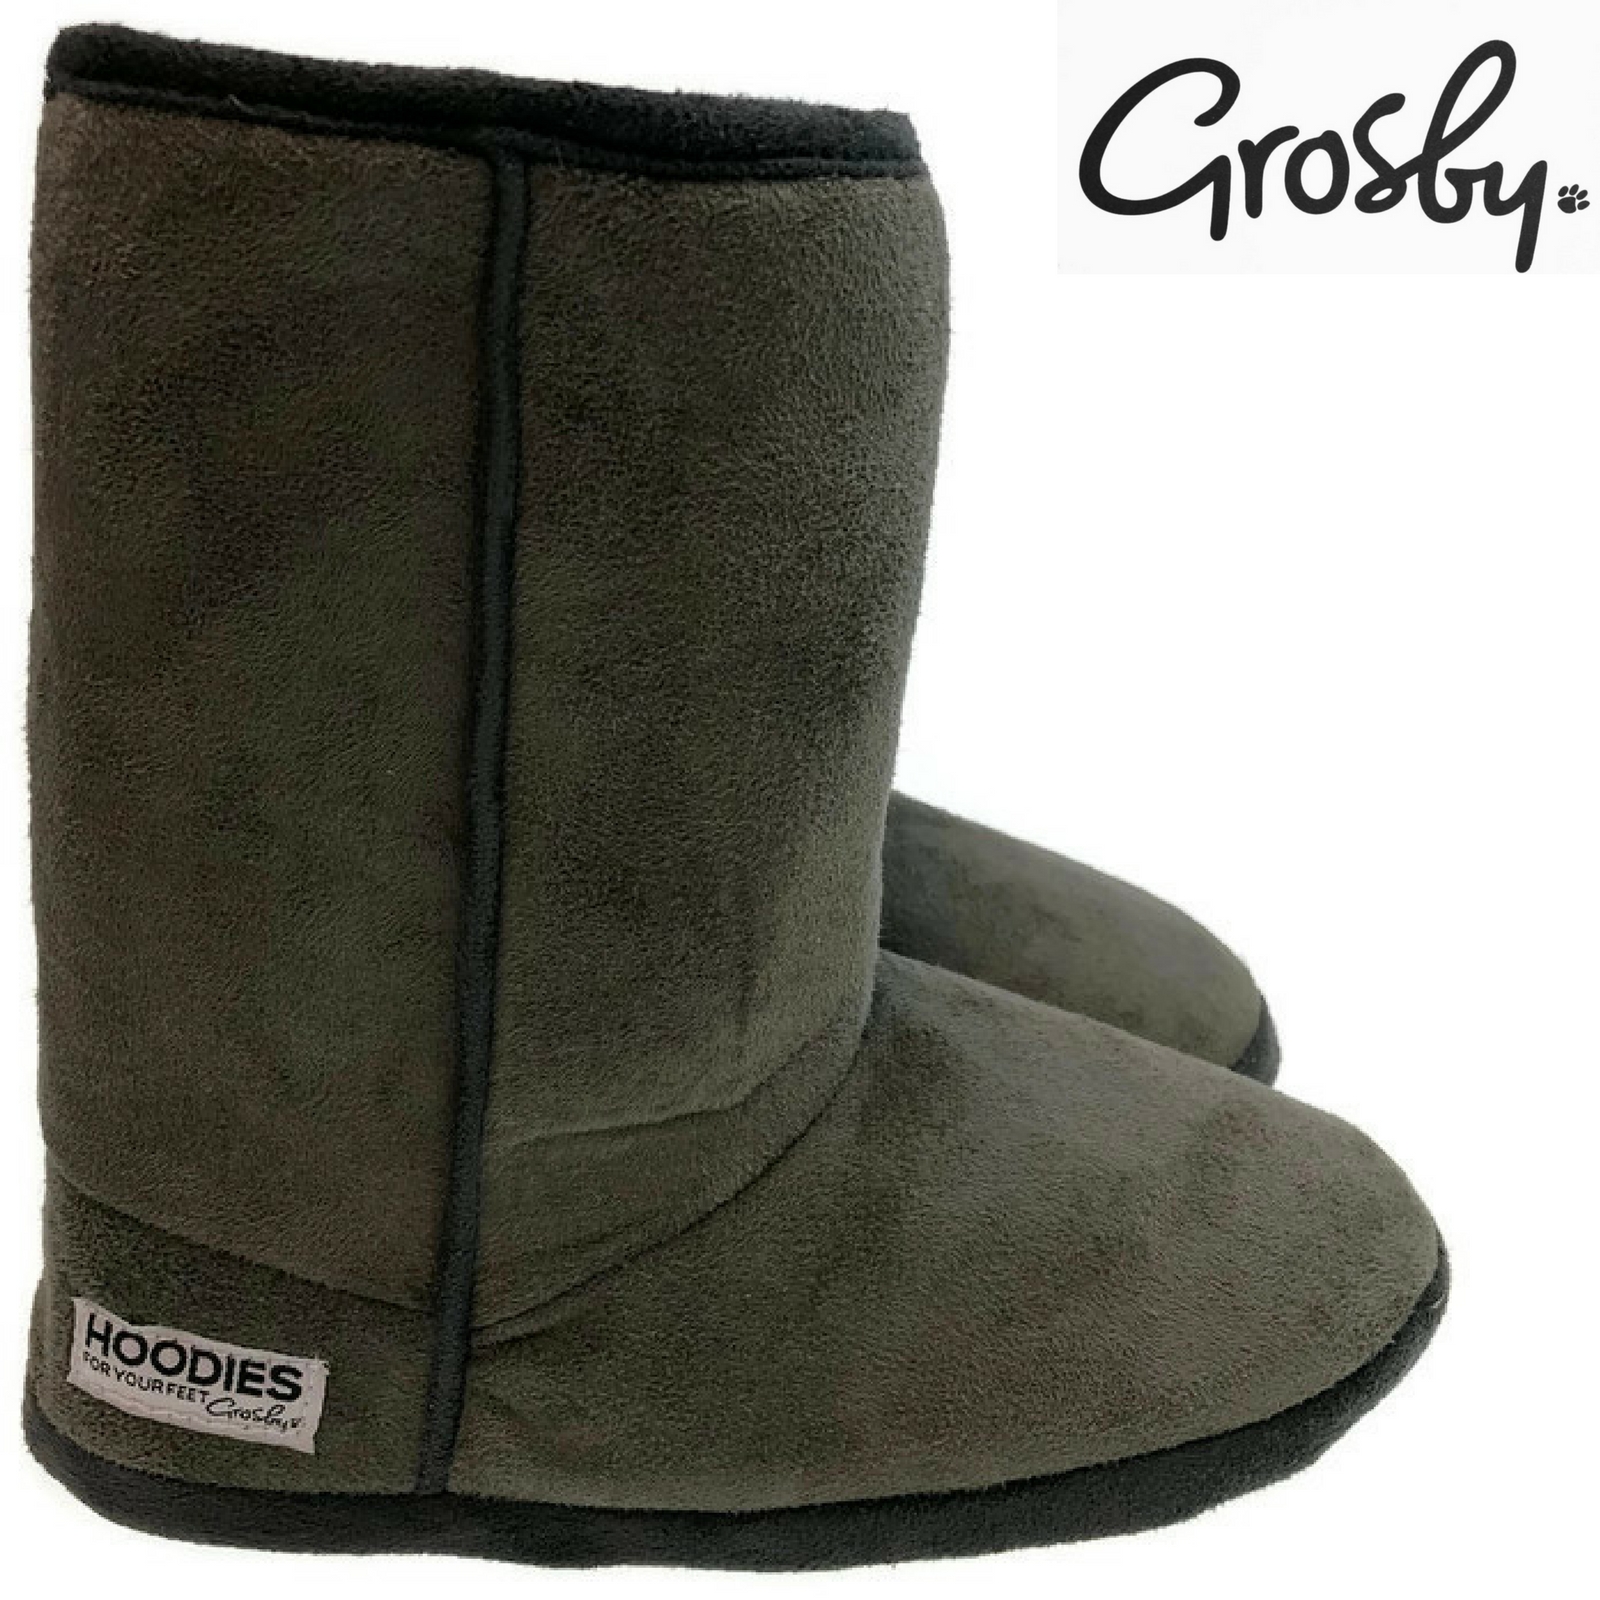 grosby hoodies for your feet